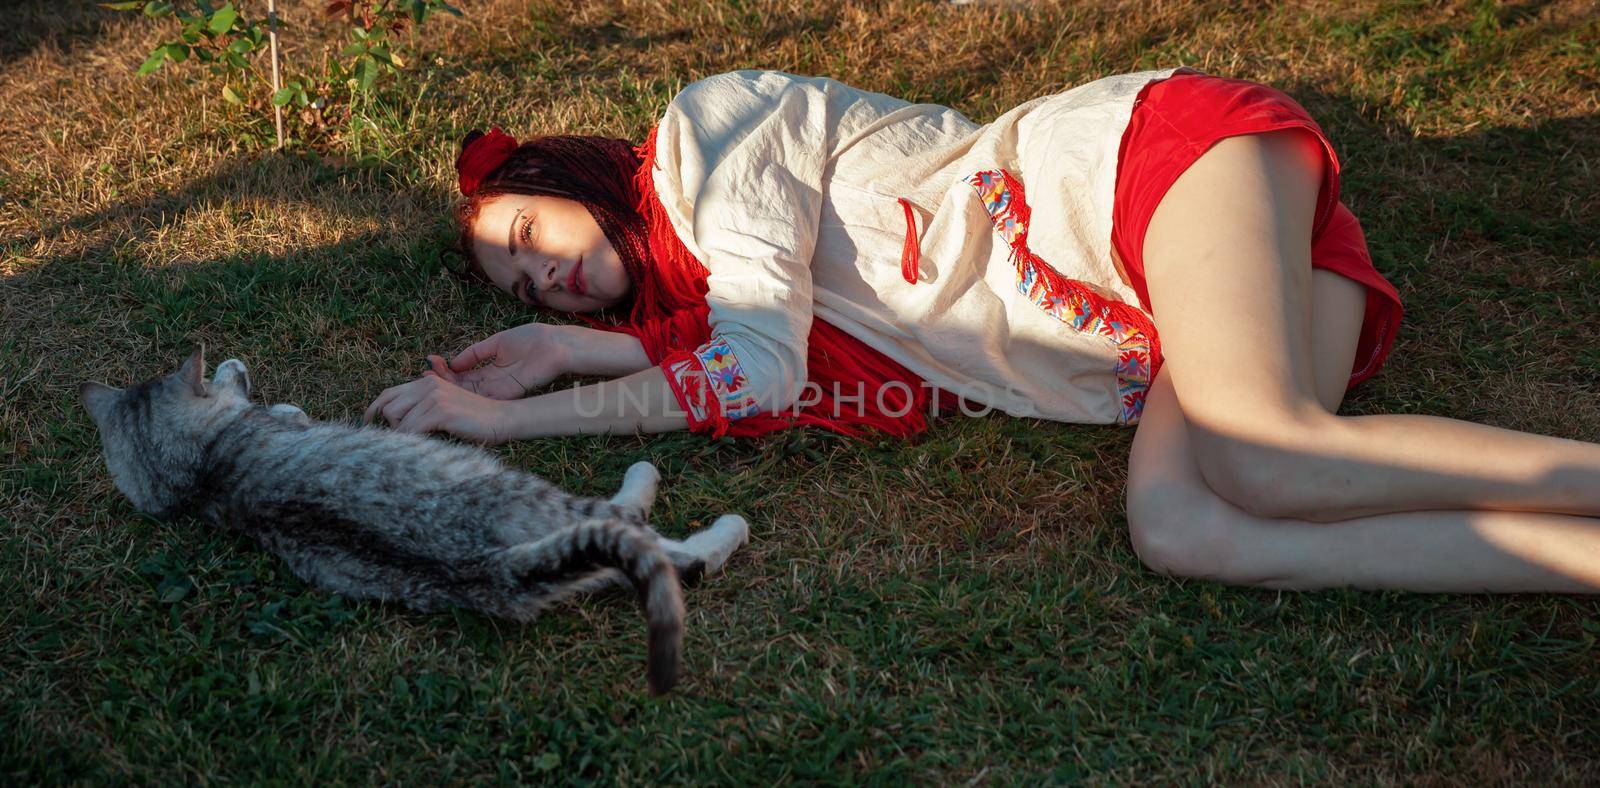 Young woman with scarlet dreadlocks in national dress lying on the grass and playing with the cat. Outdoors portrait